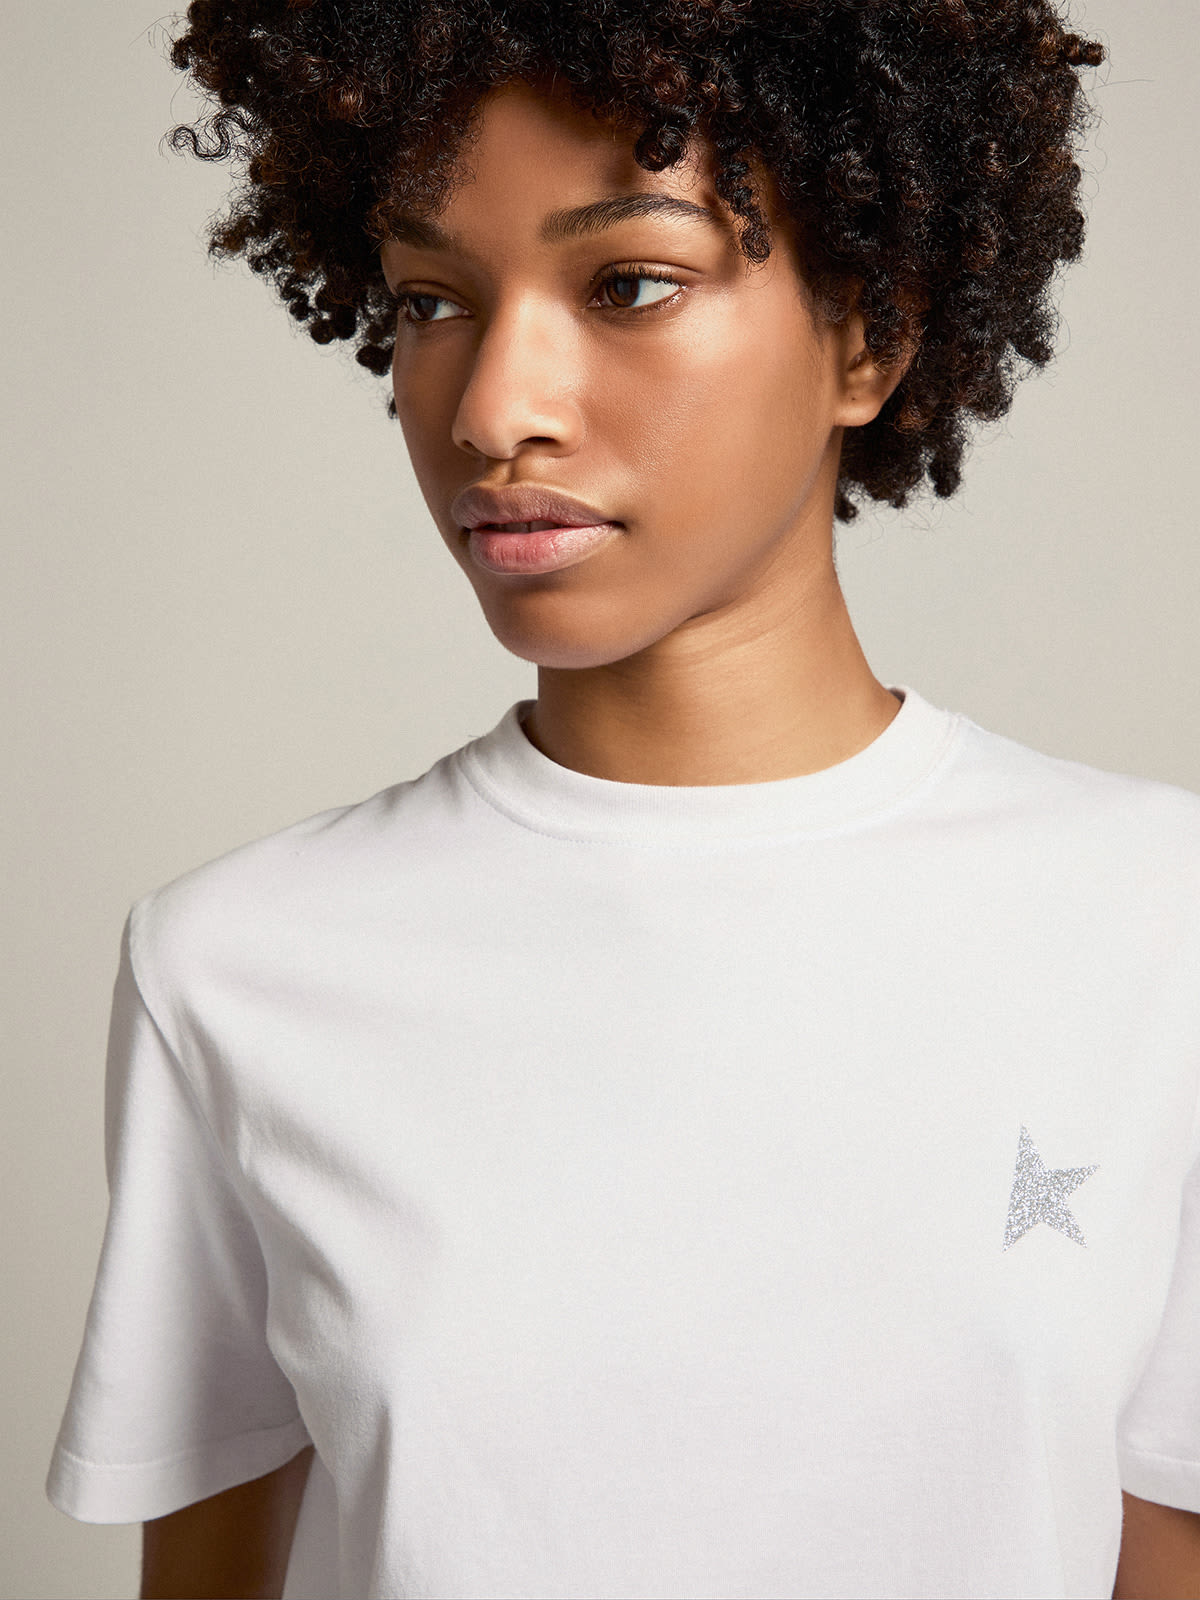 Golden Goose - Women's white T-shirt with silver glitter star on the front in 